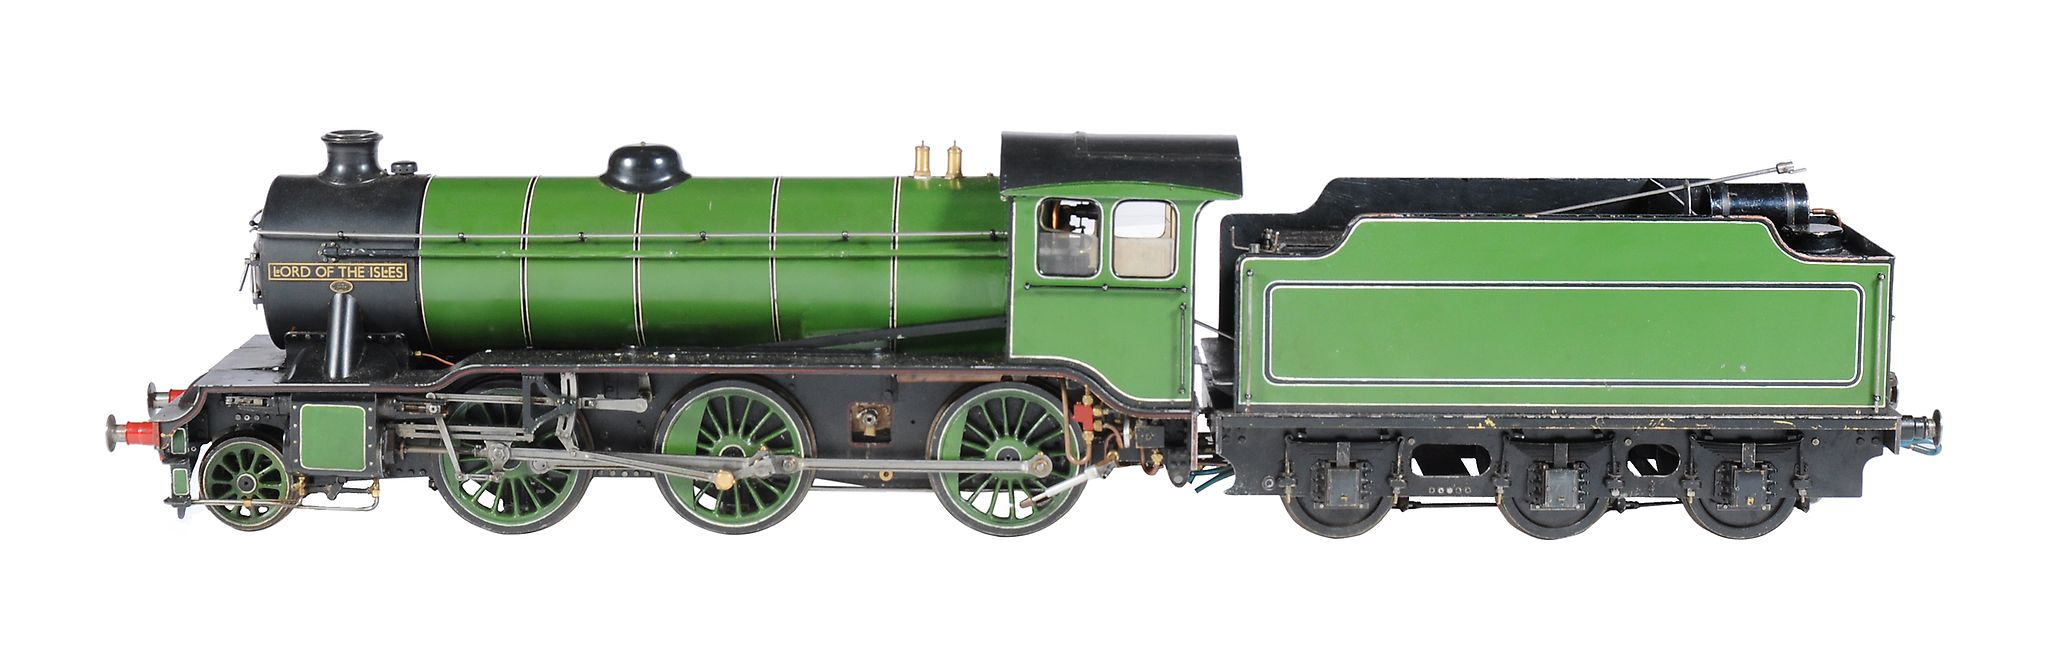 A well-engineered 5 inch gauge model of a LNER K4 Class 2-6-0 tender locomotive Lord of the Isles ,